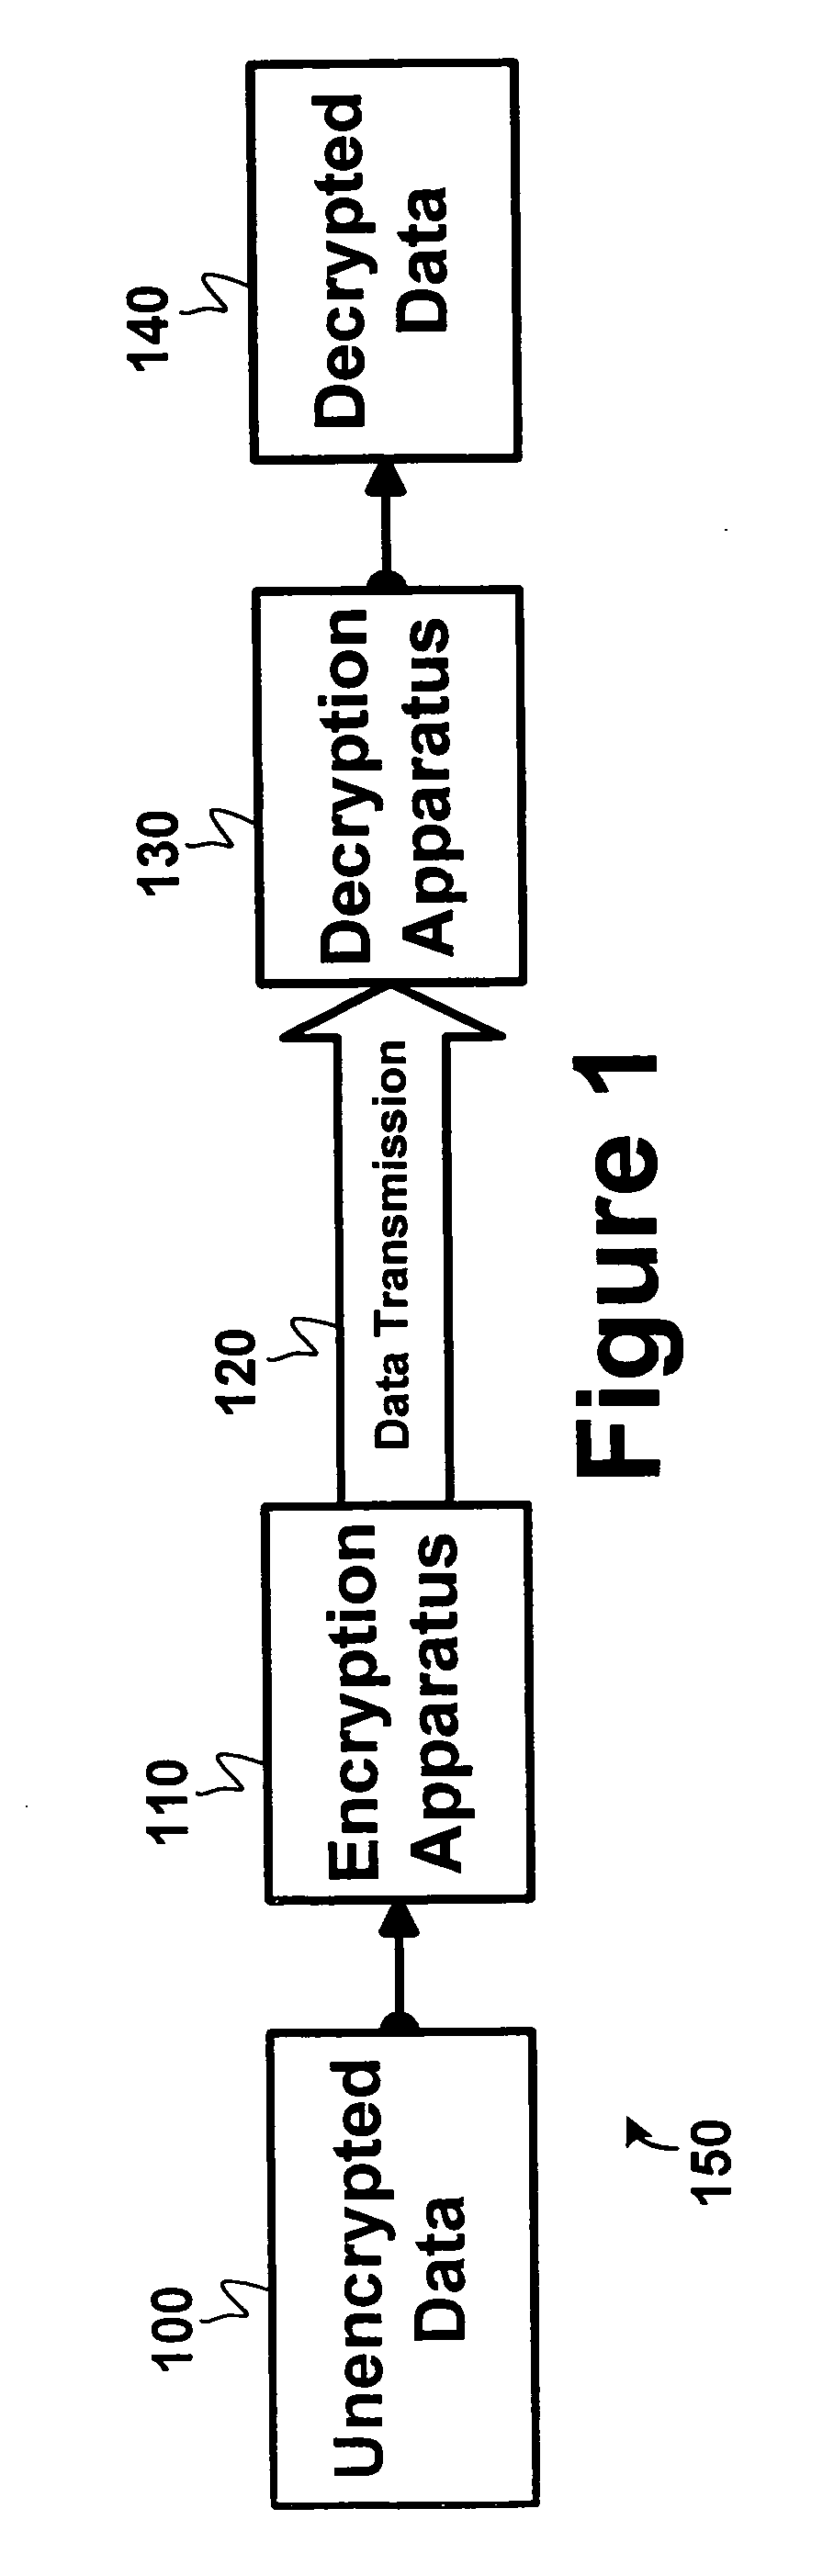 Apparatus and method for all-optical encryption and decryption of an optical signal